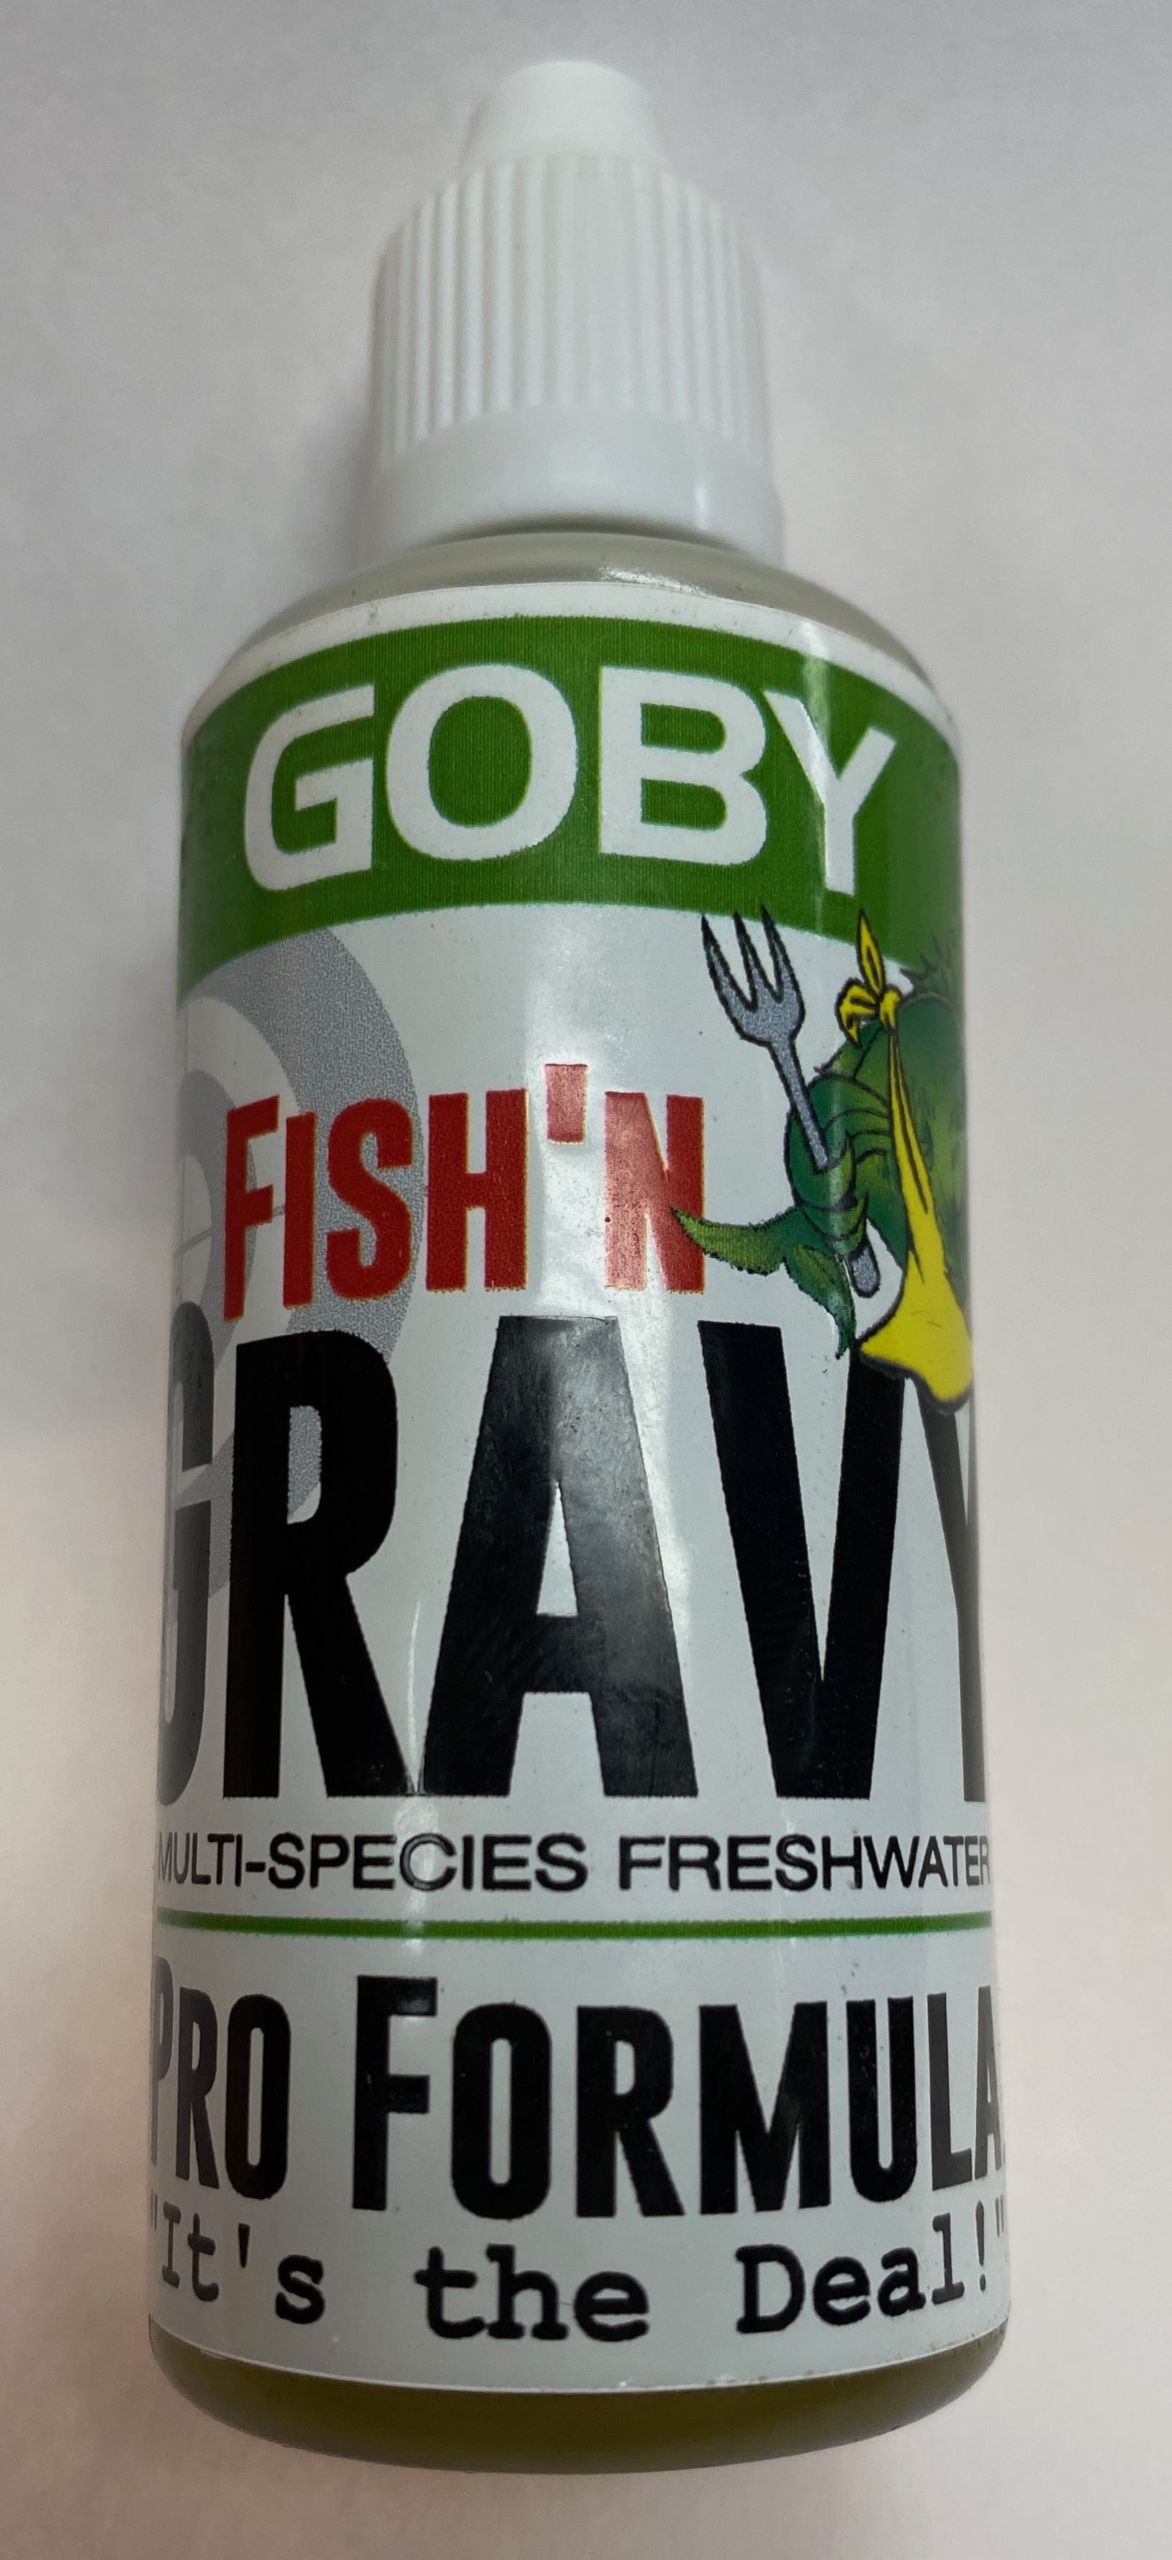 Fishing Scents and Attractants